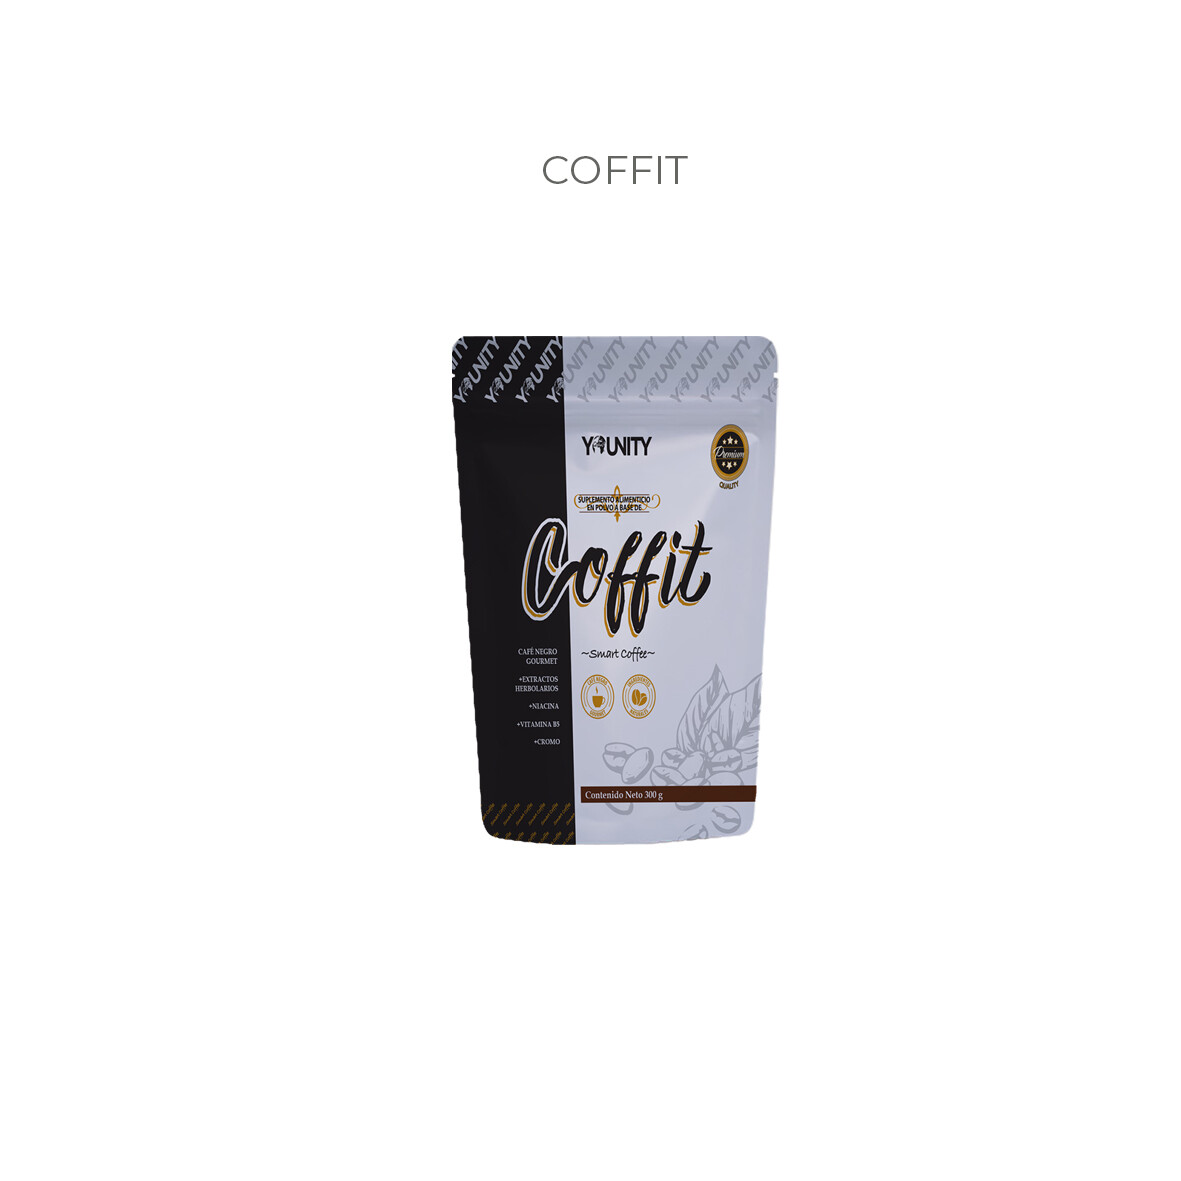 Global Younity Coffit    
| Cafe Negro Gourmet